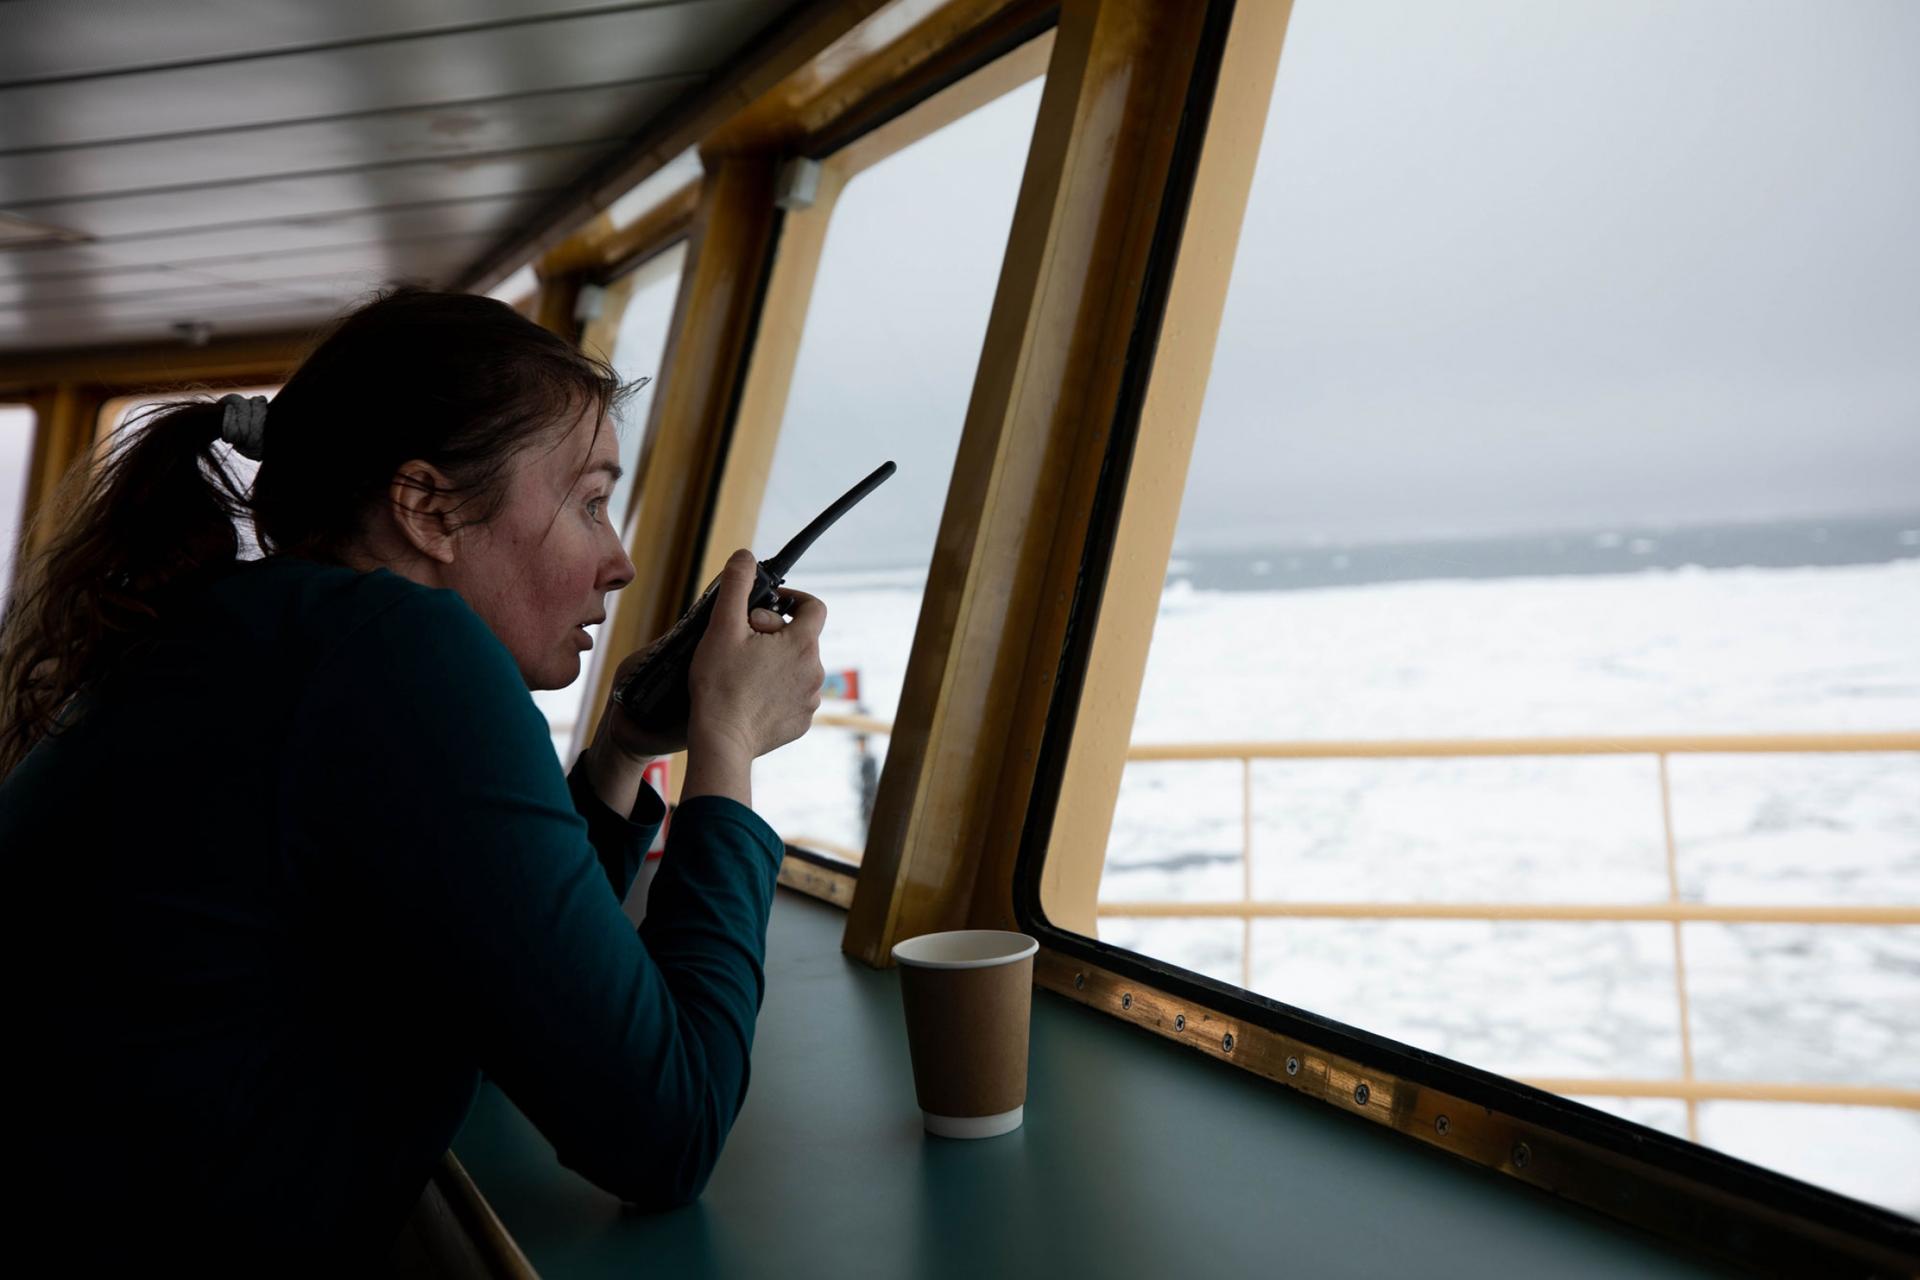 Researcher Anna Wåhlin is shown with a microphone looking out on the ocean.